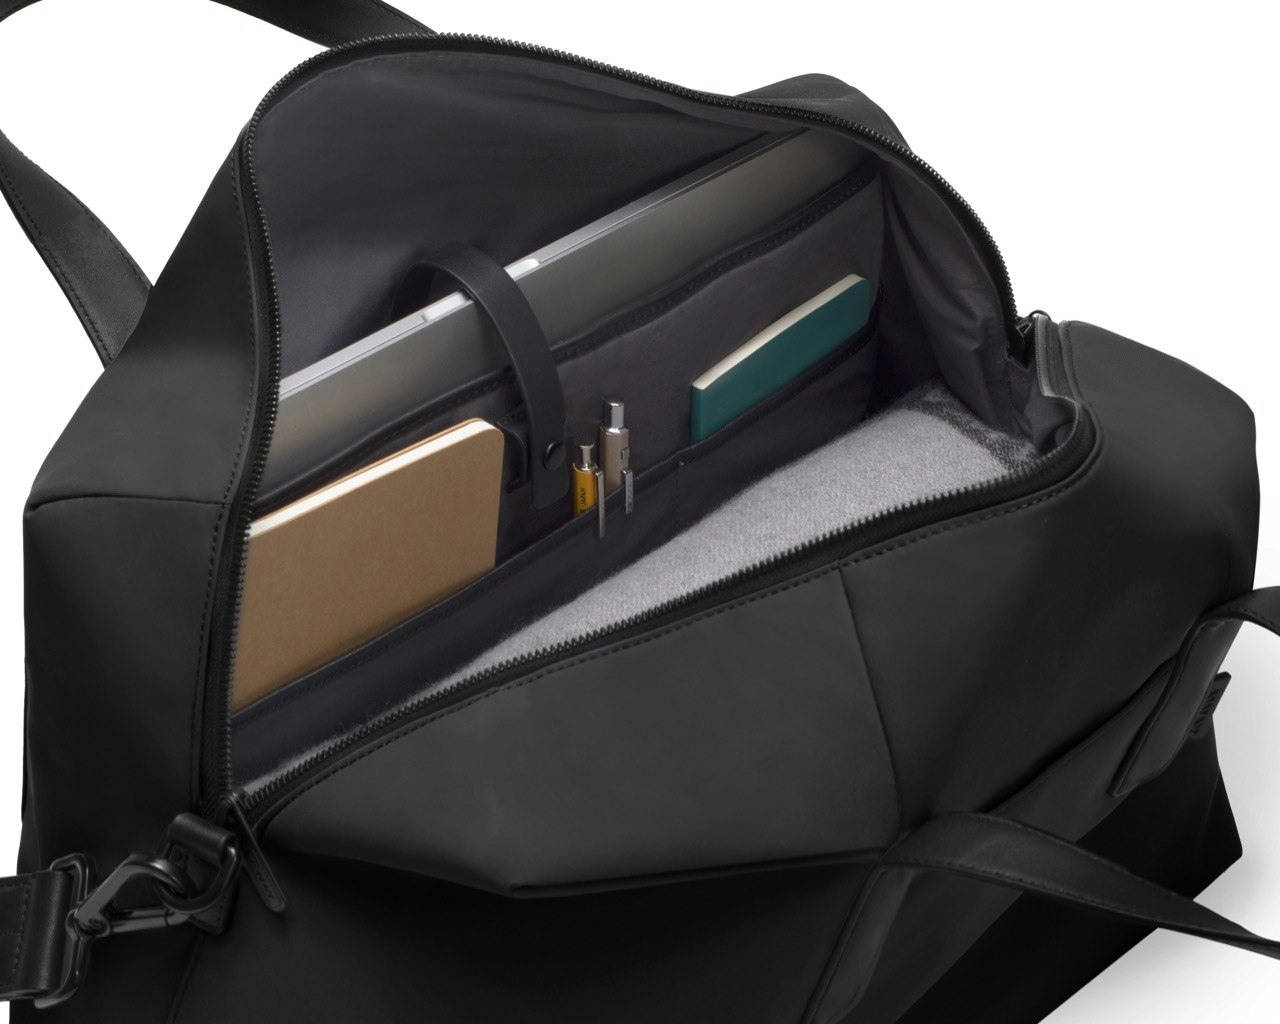 Away's black Everywhere bag, open to show clothes, notebooks, pens, and a laptop